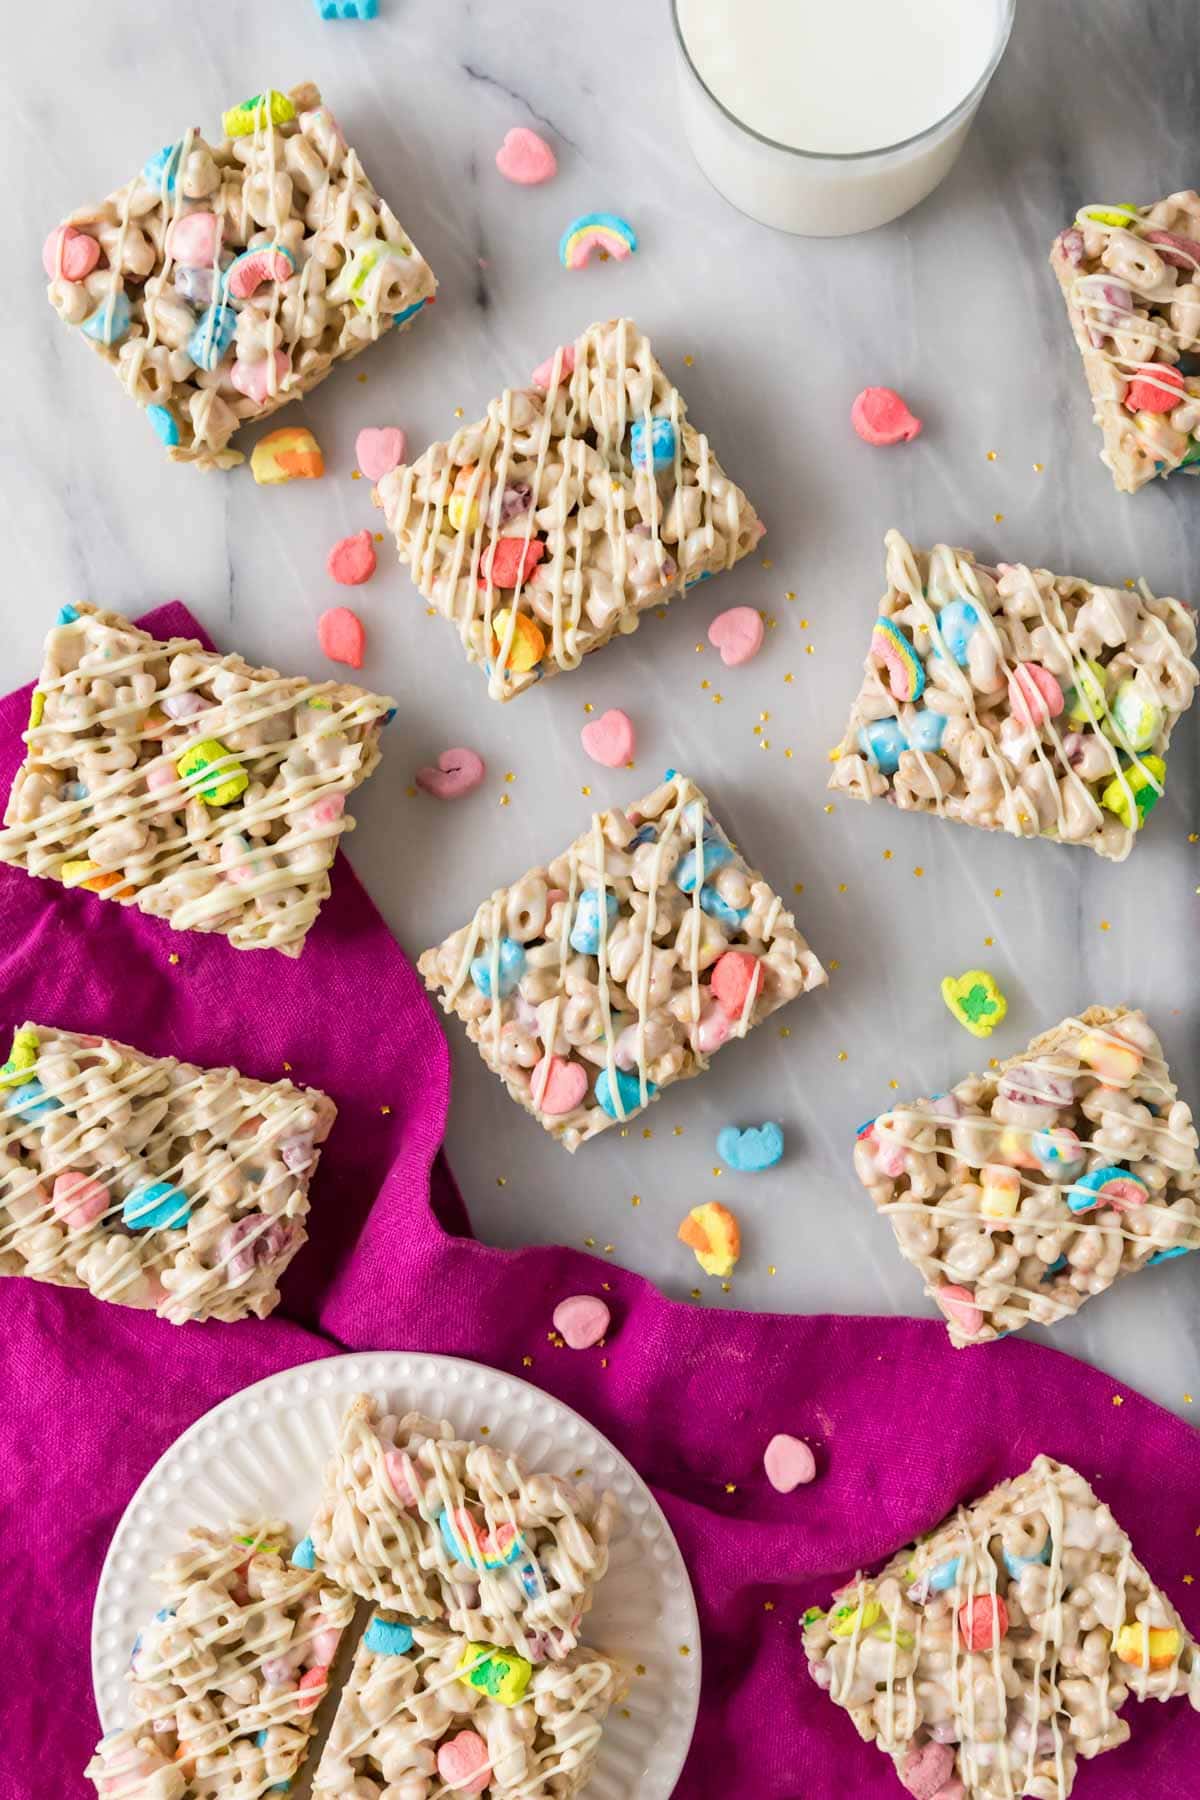 Overhead view of marshmallow cereal bars made with Lucky Charms cereal.